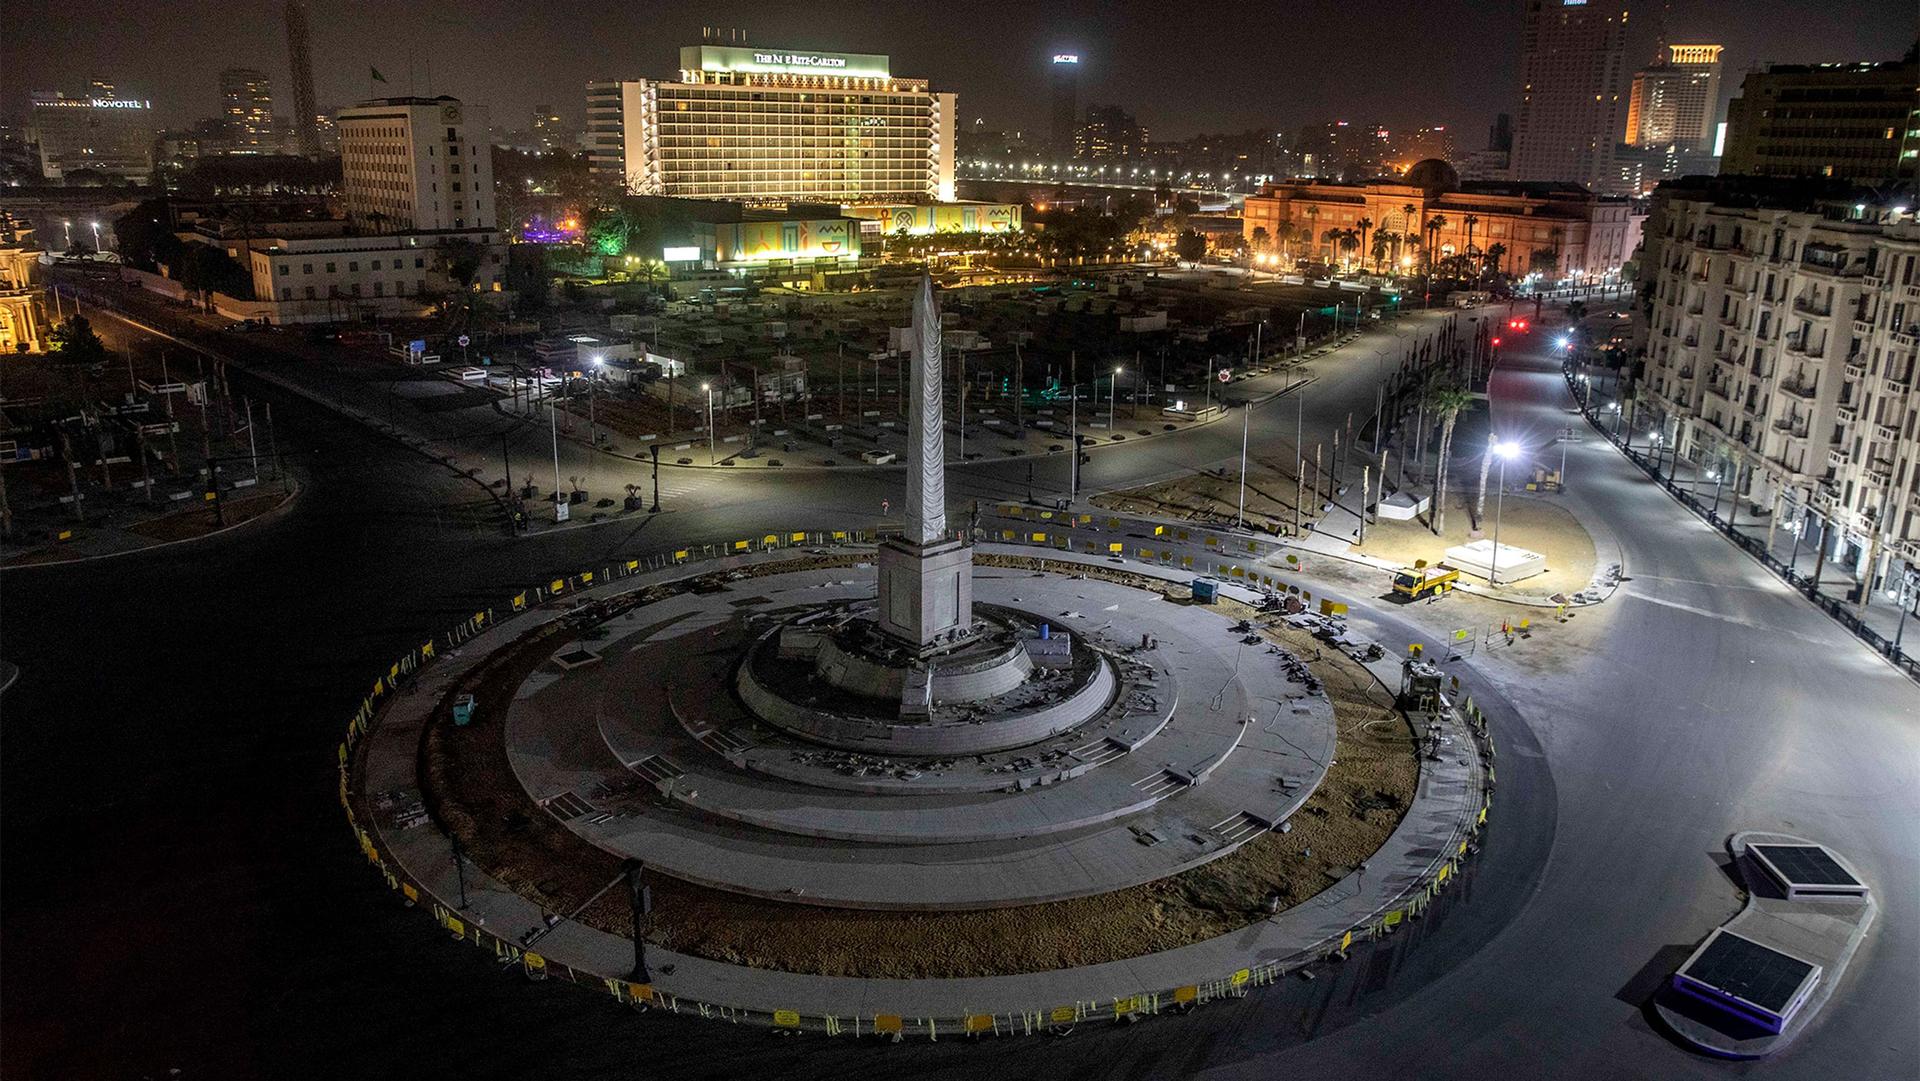 A general view of Tahrir Square in Cairo, Egypt